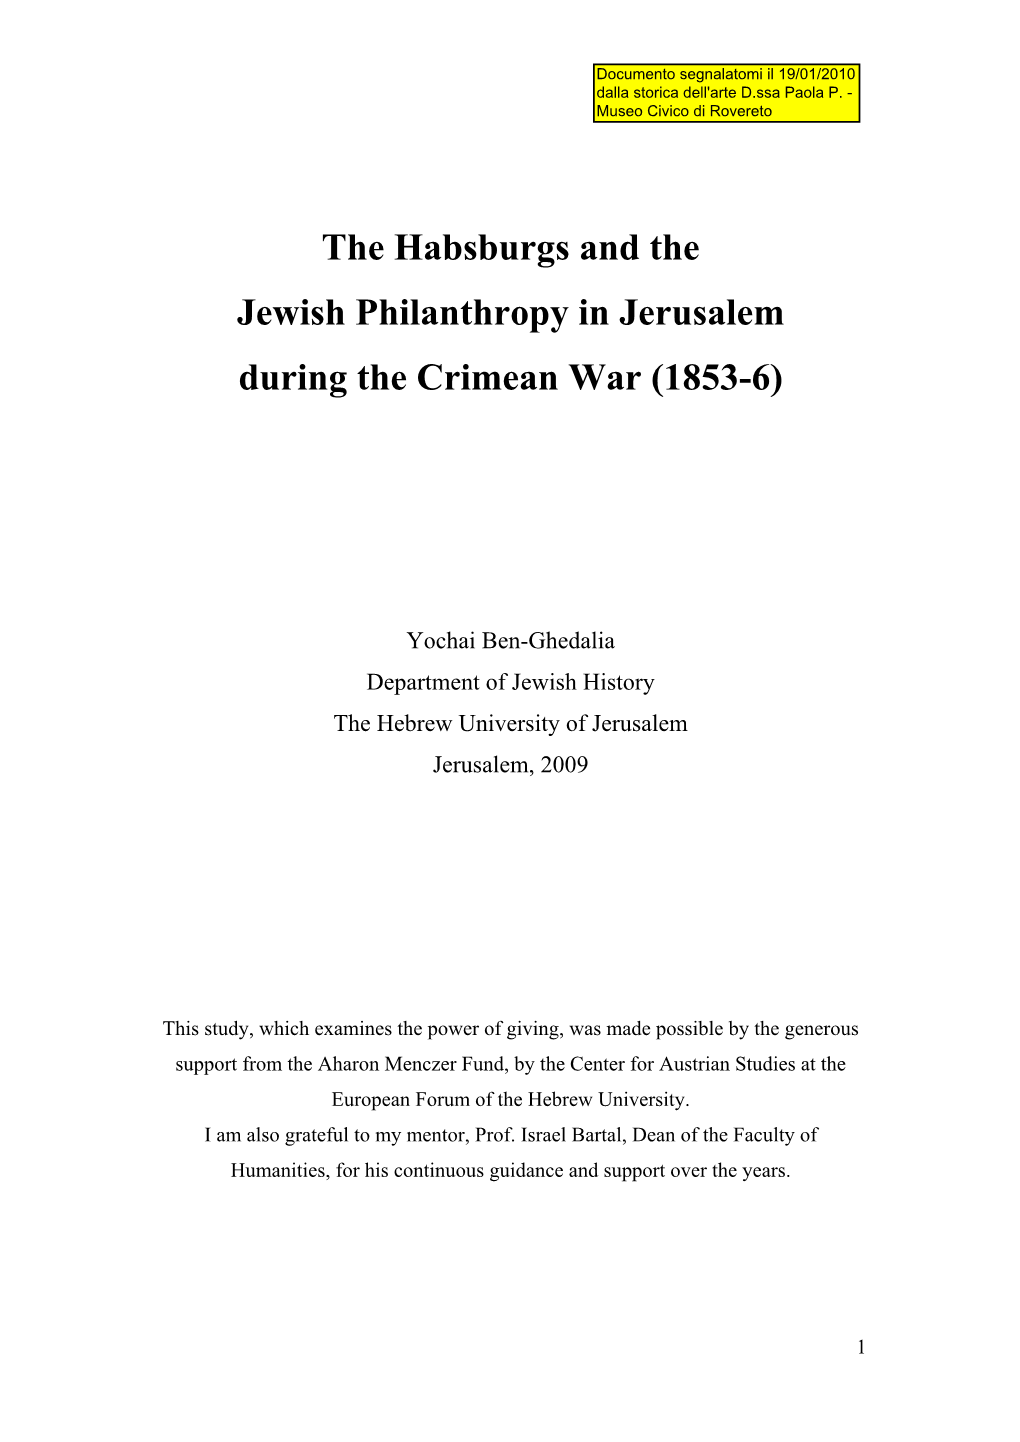 The Habsburgs and the Jewish Philanthropy in Jerusalem During the Crimean War (1853-6)